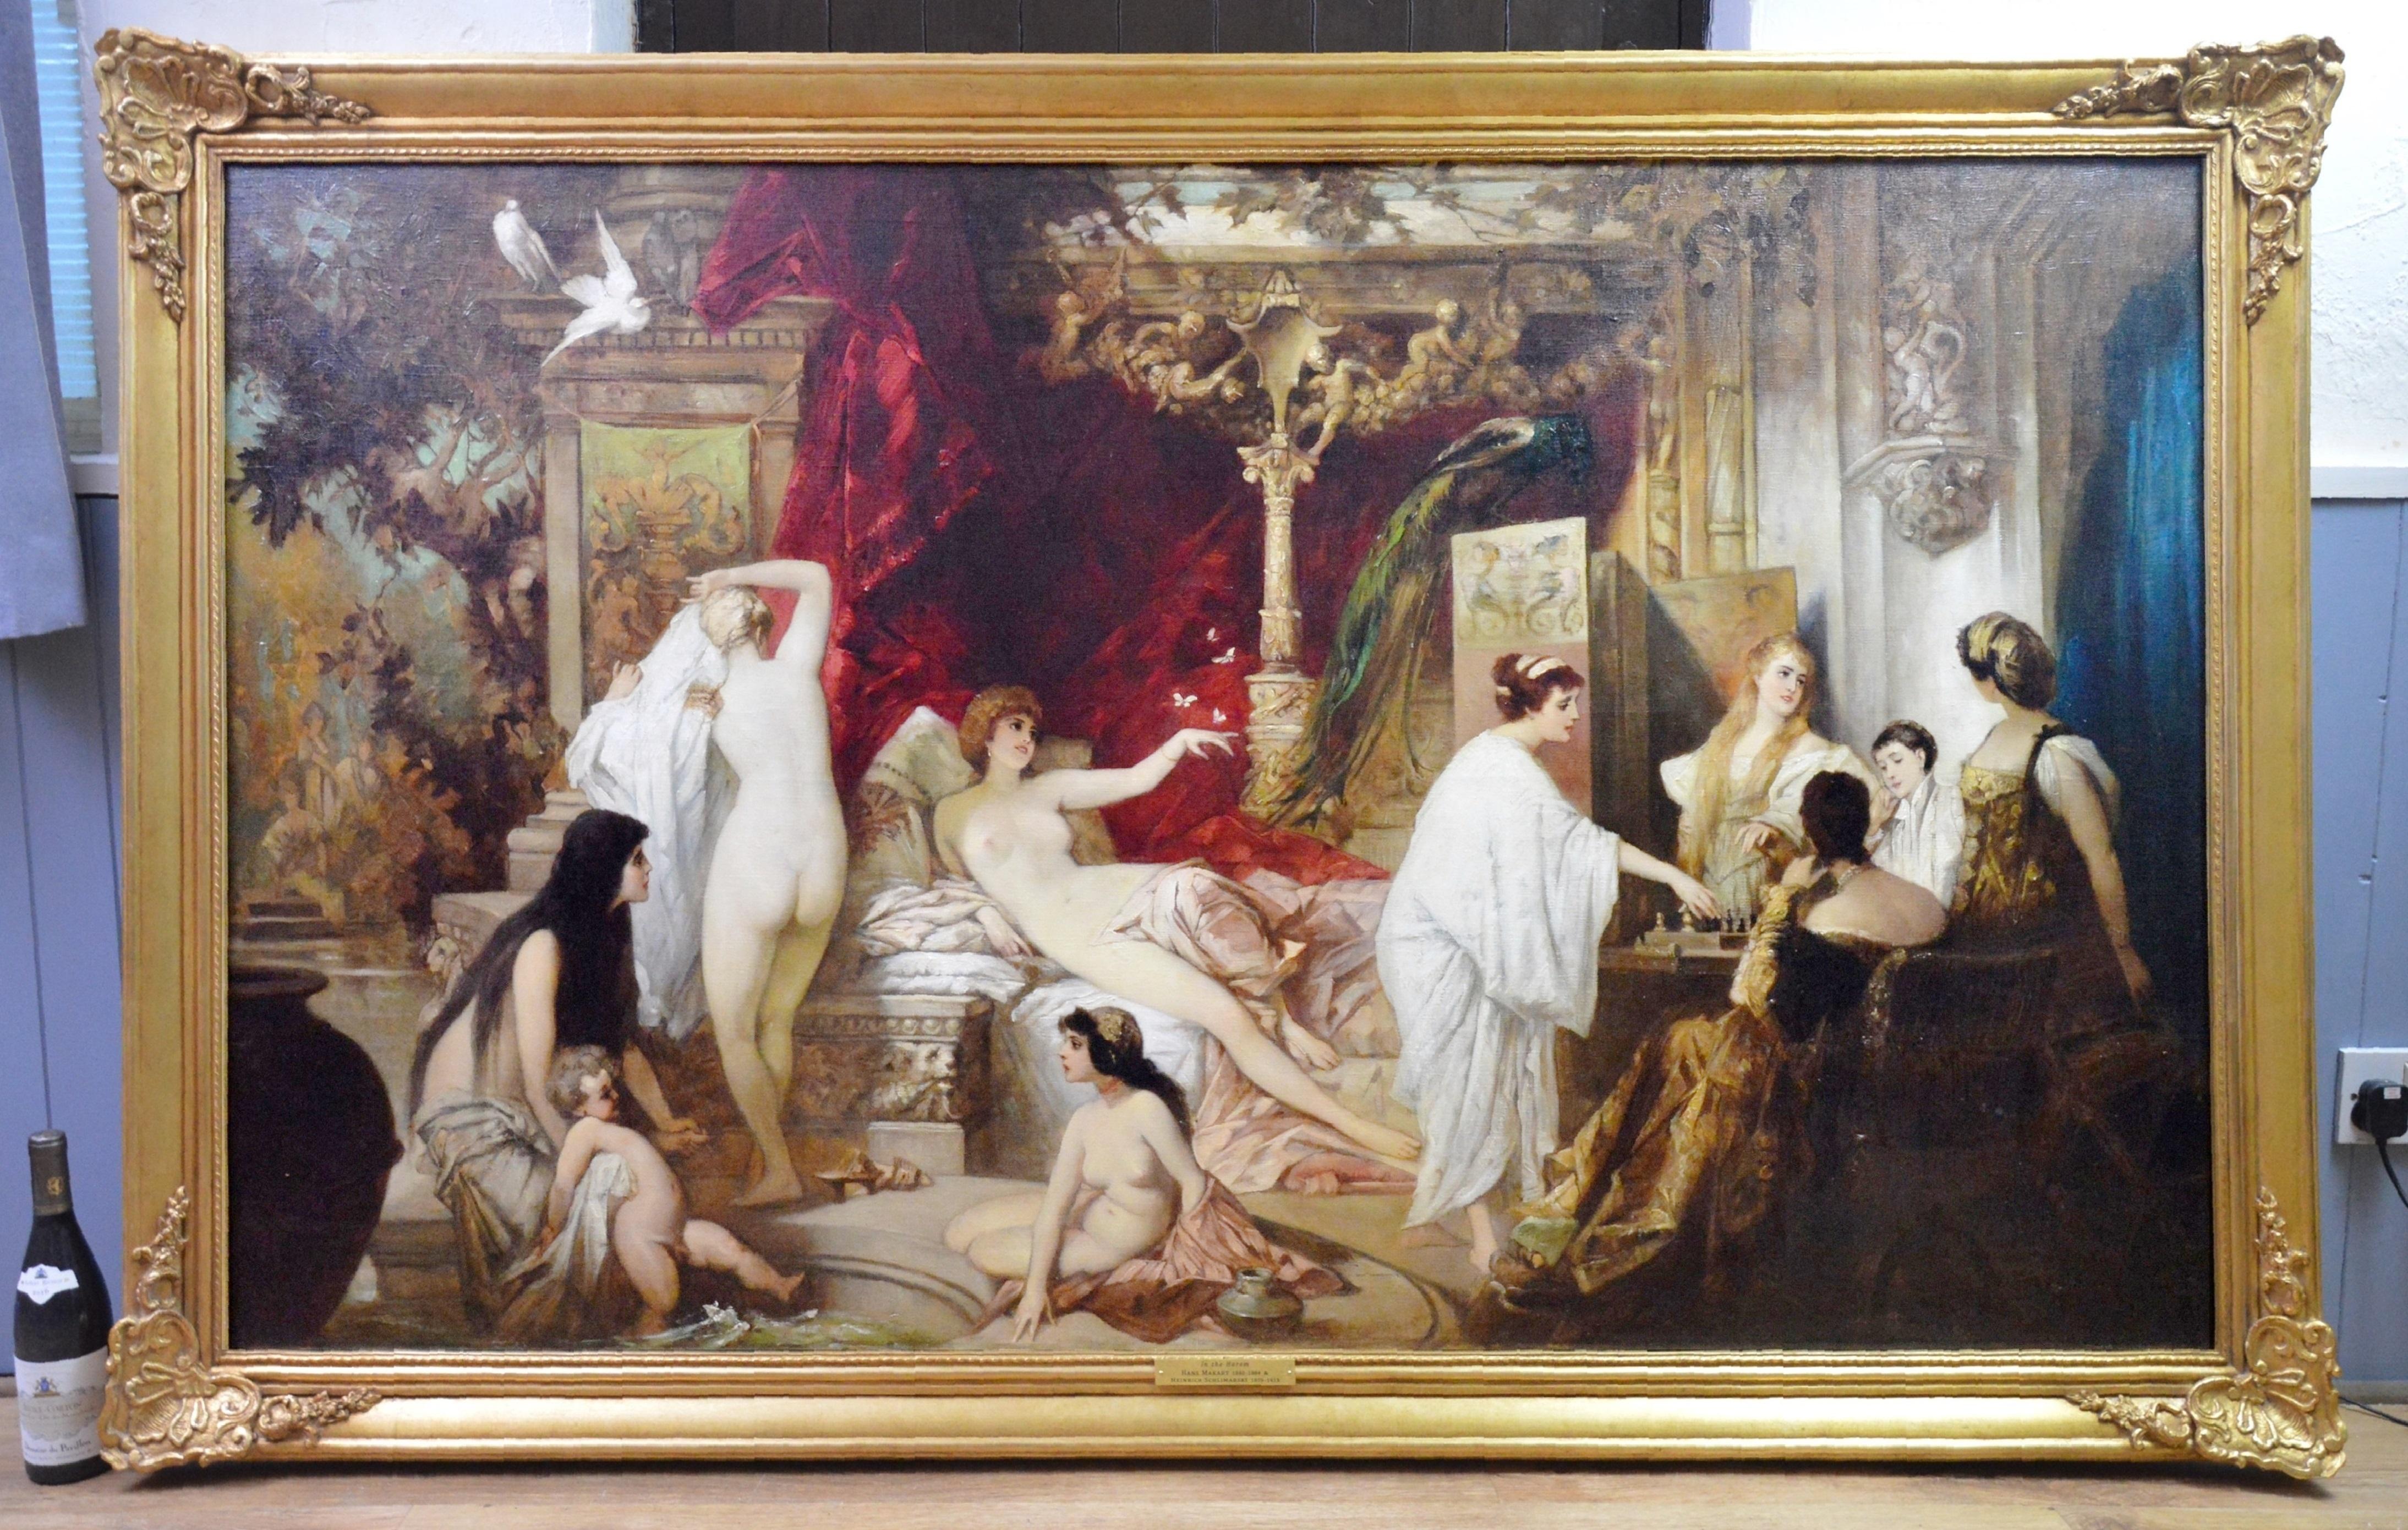 ‘In the Harem’ by Hans Makart (1840-1884) and Heinrich Hans  Schlimarski (1859-1913). The painting is signed and presented in a superb quality newly commissioned bespoke gold metal leaf frame. 

Hans Makart (1840-1884) was perhaps the most important